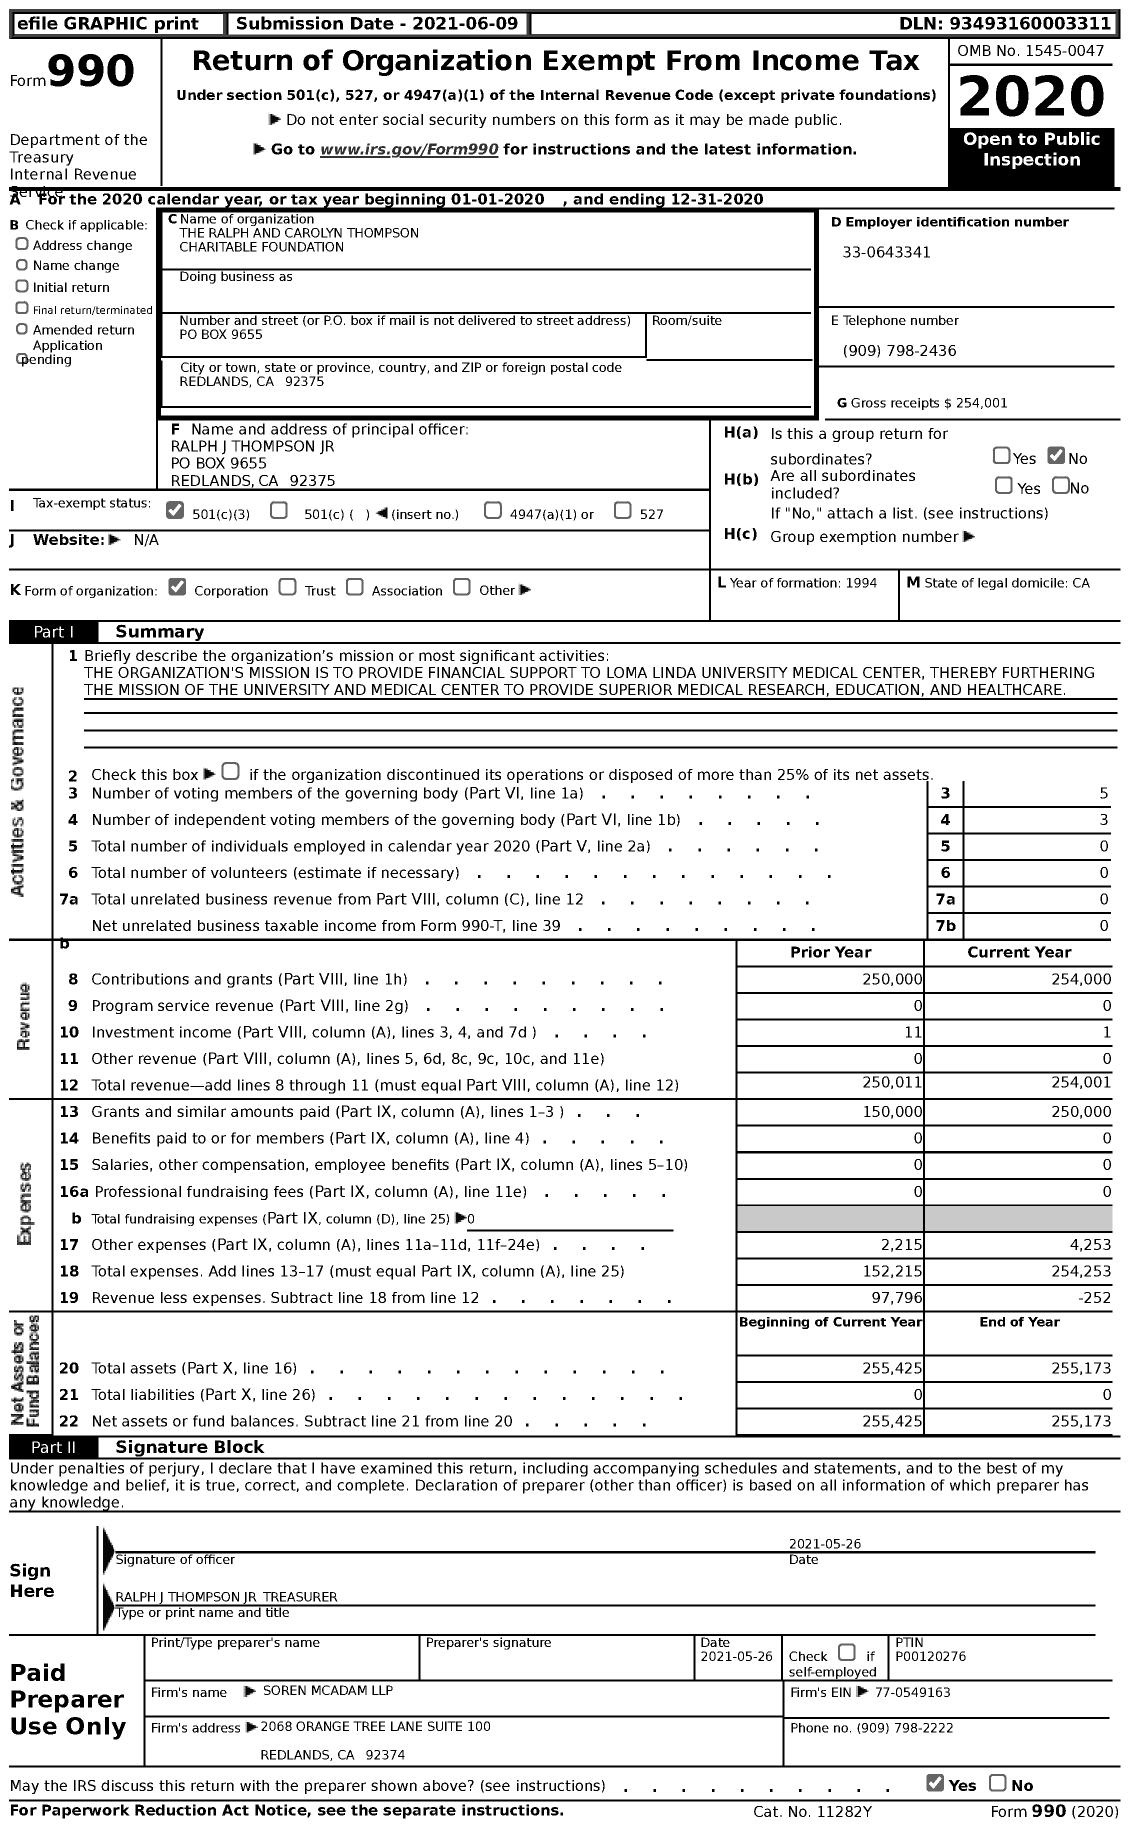 Image of first page of 2020 Form 990 for The Ralph and Carolyn Thompson Charitable Foundation